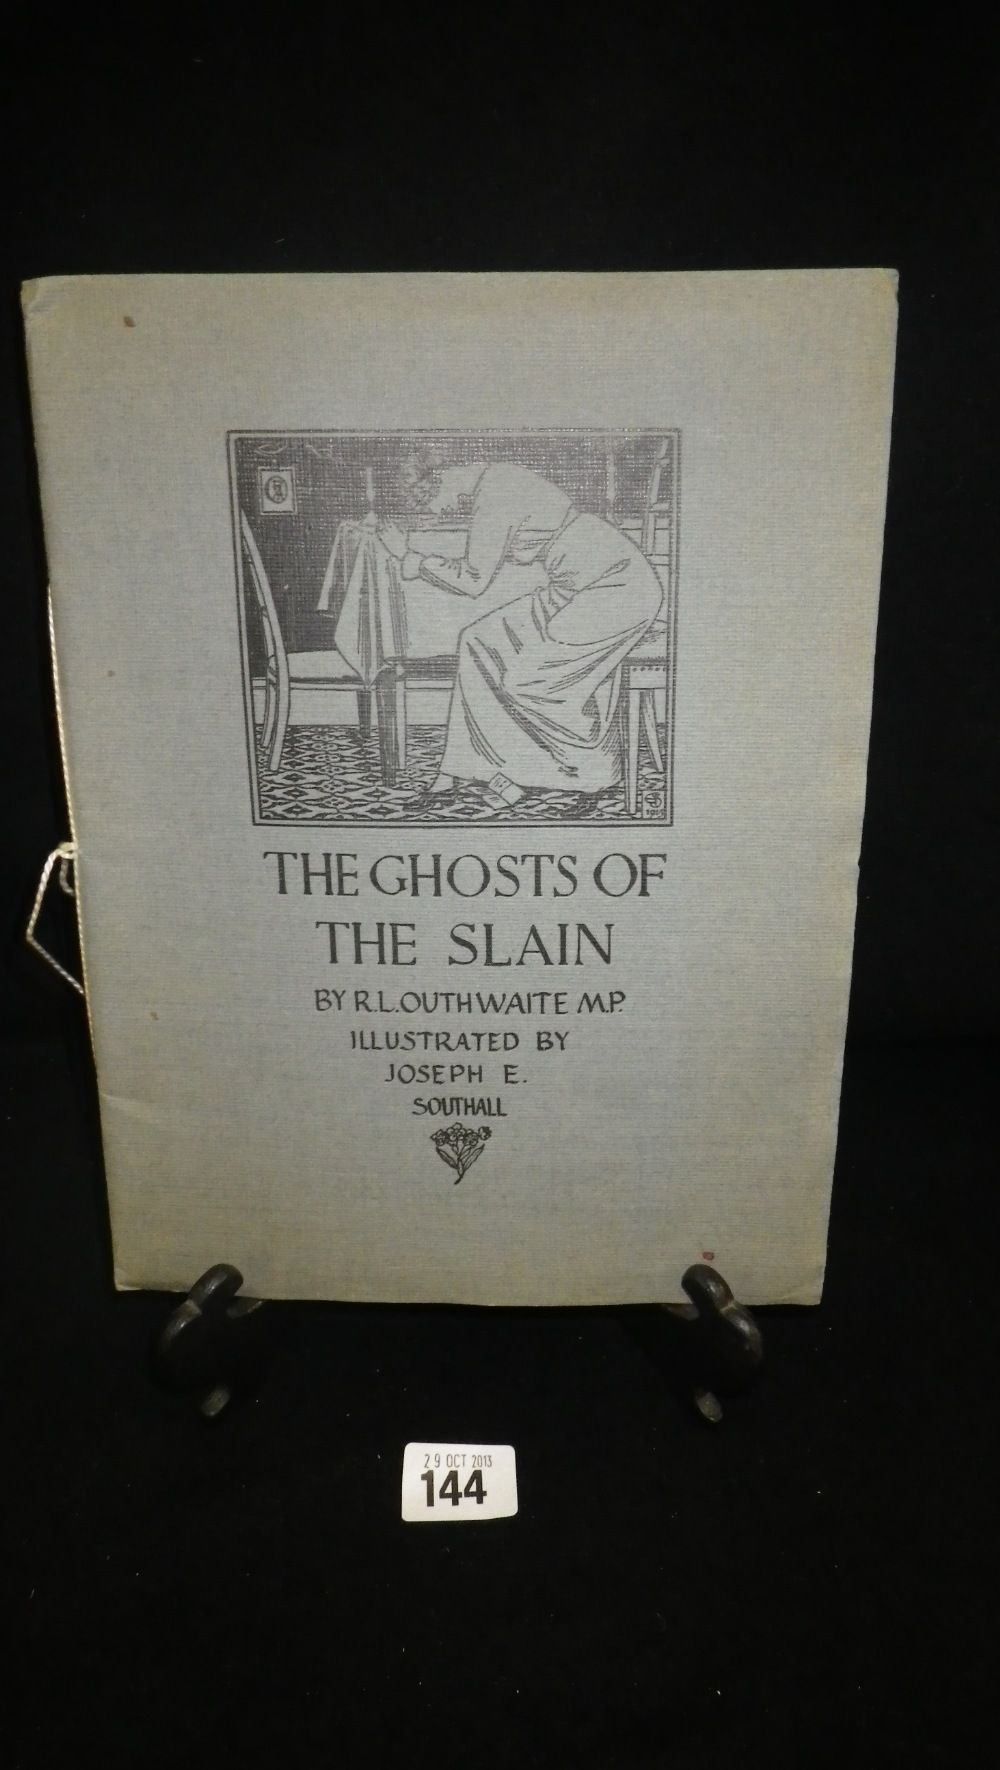 `The Ghosts of the Slain` by R.L. Outhwaite M.P., illustrated by Joseph E. Southall, published by